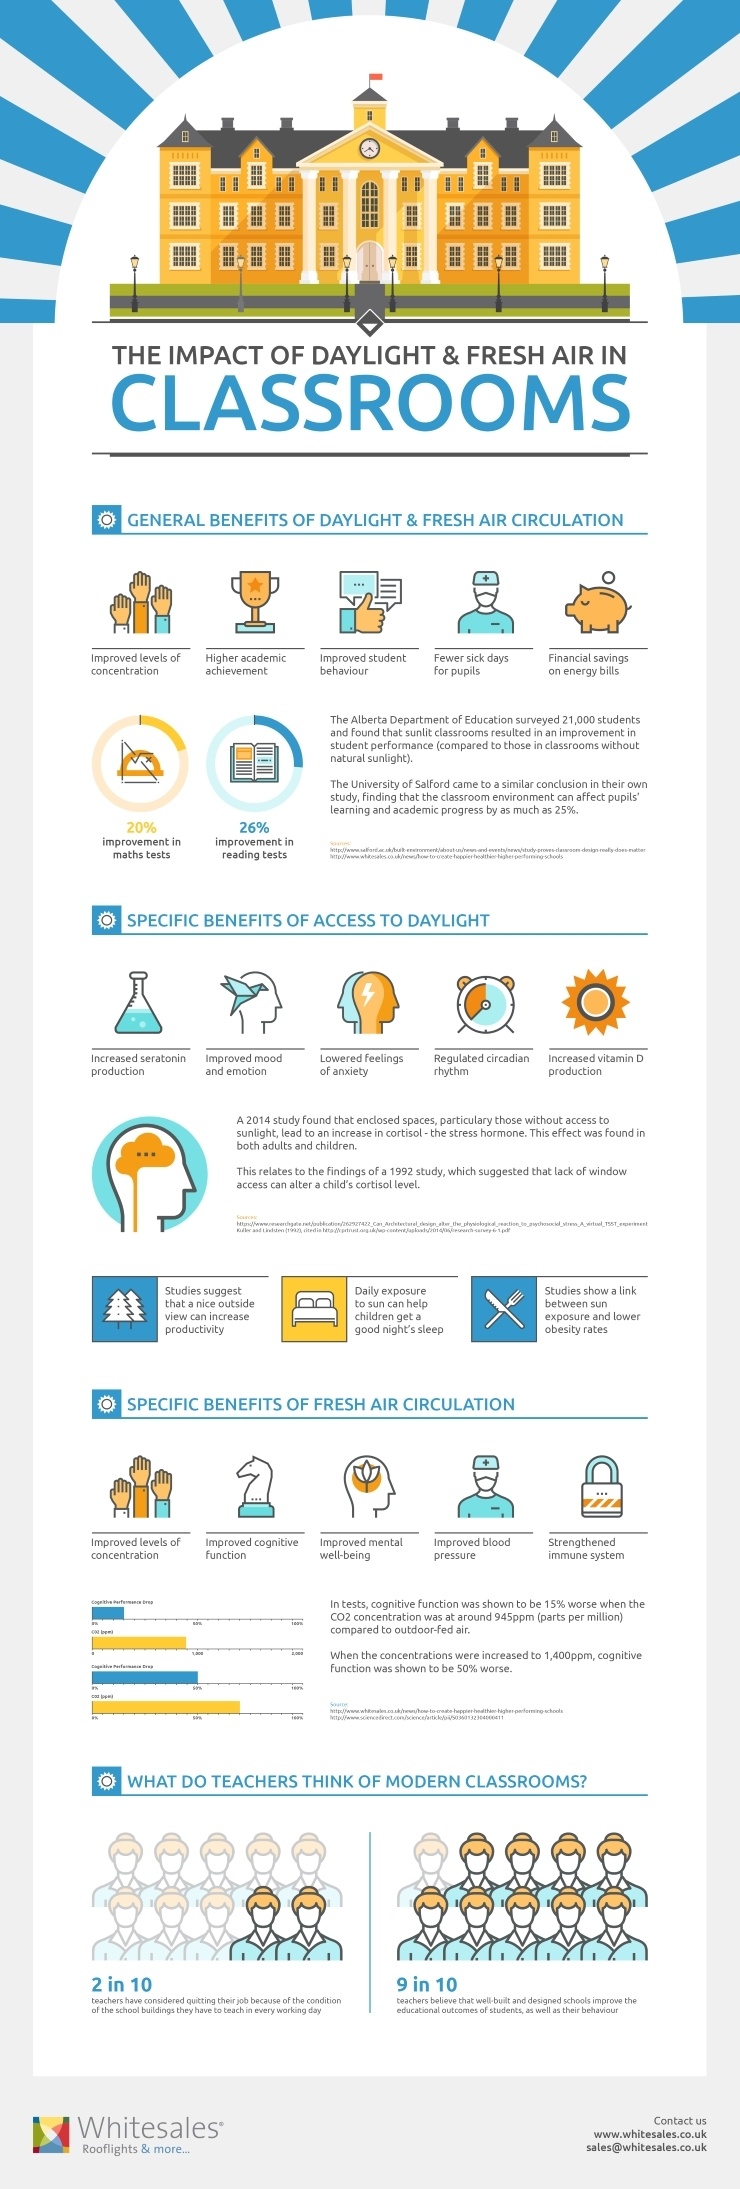 The Importance of Daylight and Fresh Air in the Classroom Infographic